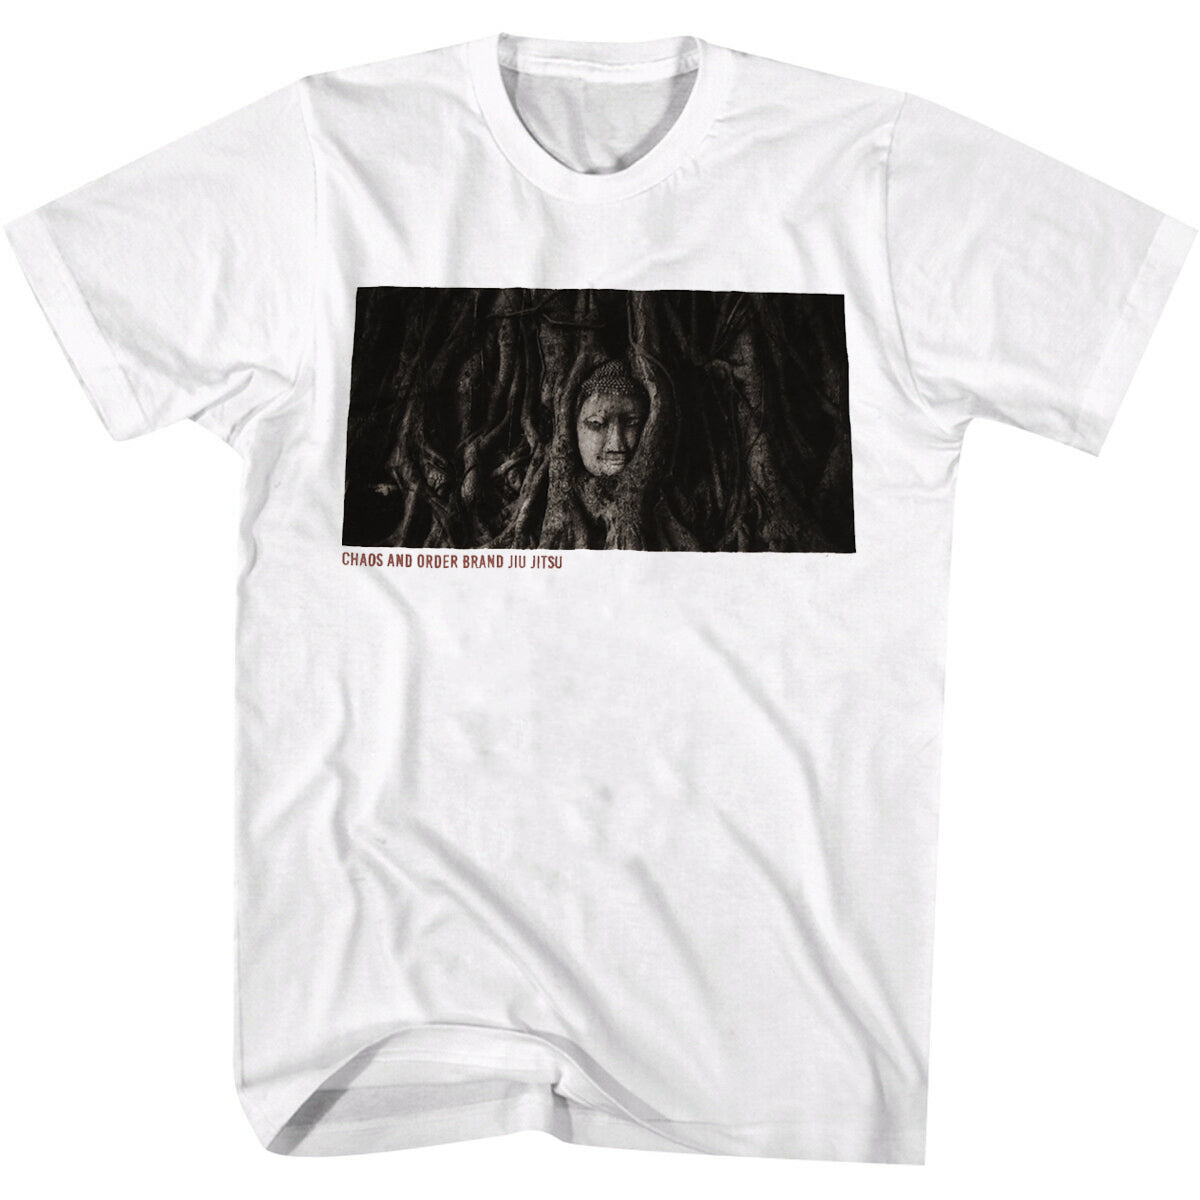 Chaos and Order Roots T-Shirt - White Chaos and Order